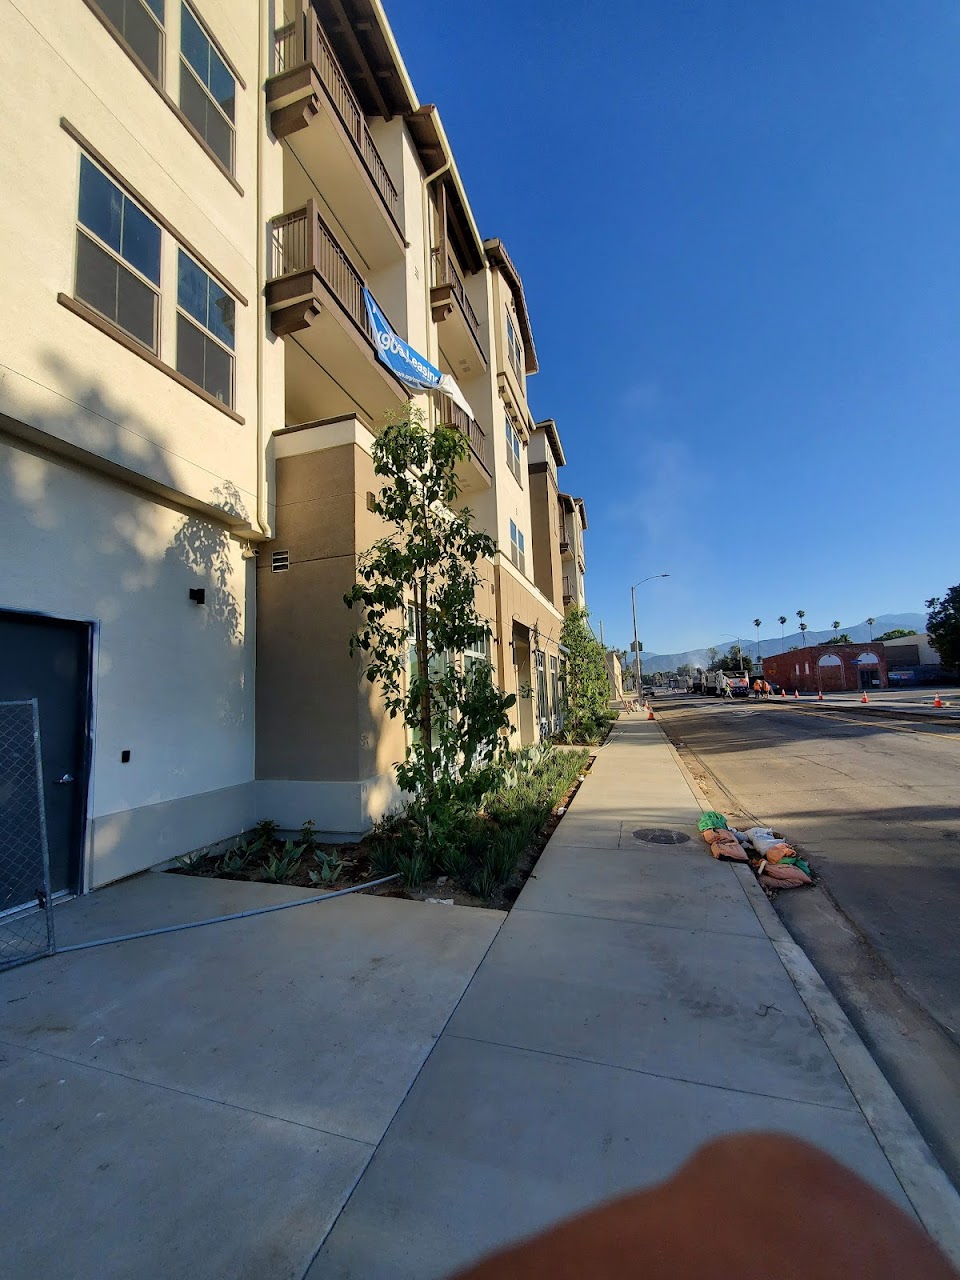 Photo of VETERANS PARK APARTMENTS. Affordable housing located at 444 W. COMMERCIAL STREET POMONA, CA 91768